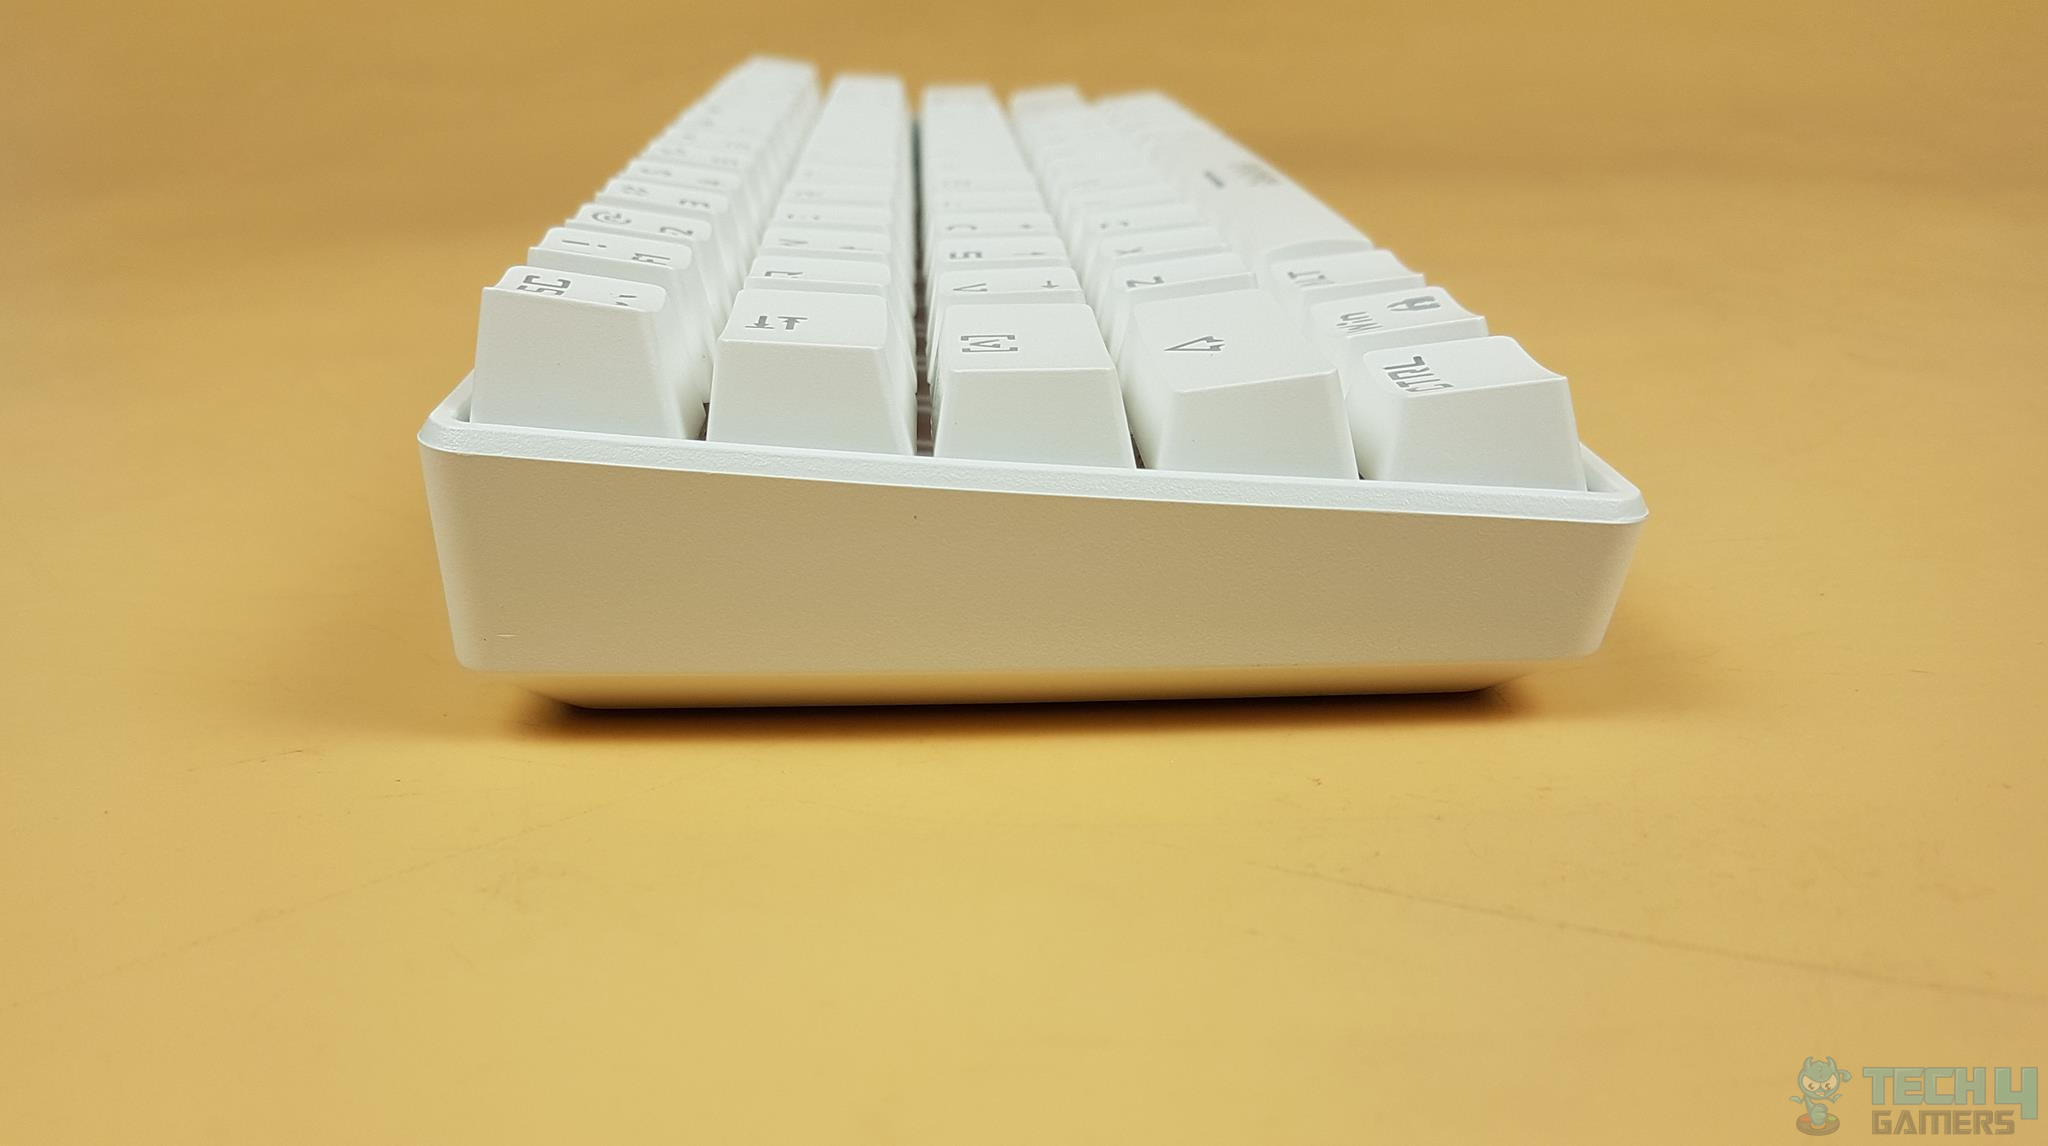 Showing the GAMDIAS HERMES E4 Keyboard’s side-view.